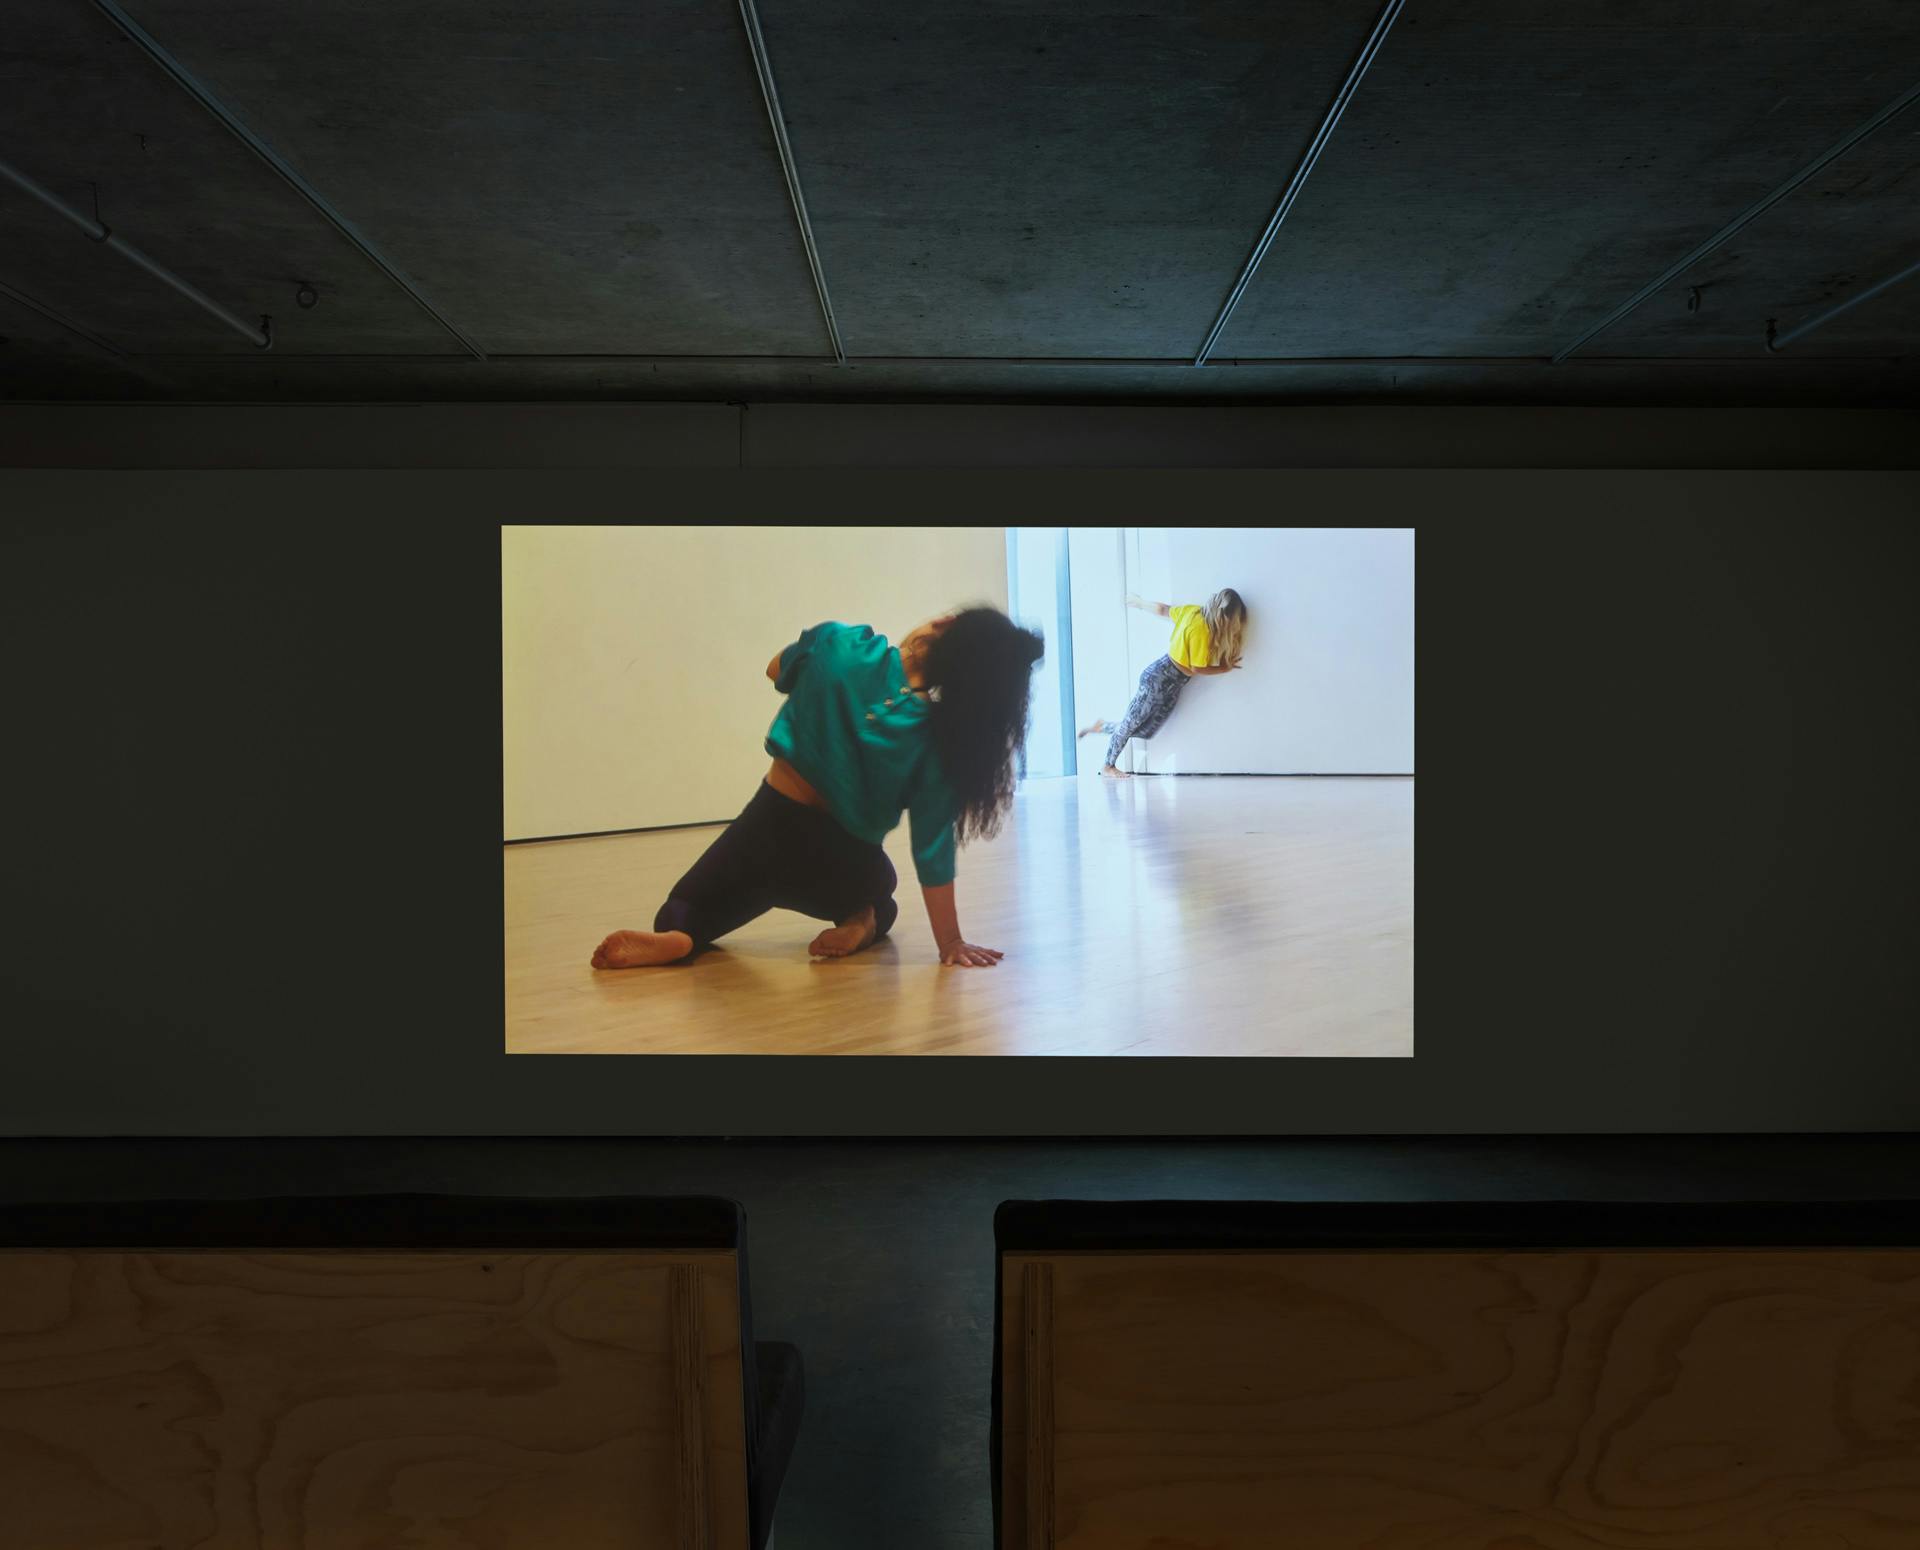 Video by Tanya Lukin Linklater projected on a wall in a dark room. Video depicts two dancers in mid-movement in a room with white walls and wood floor.